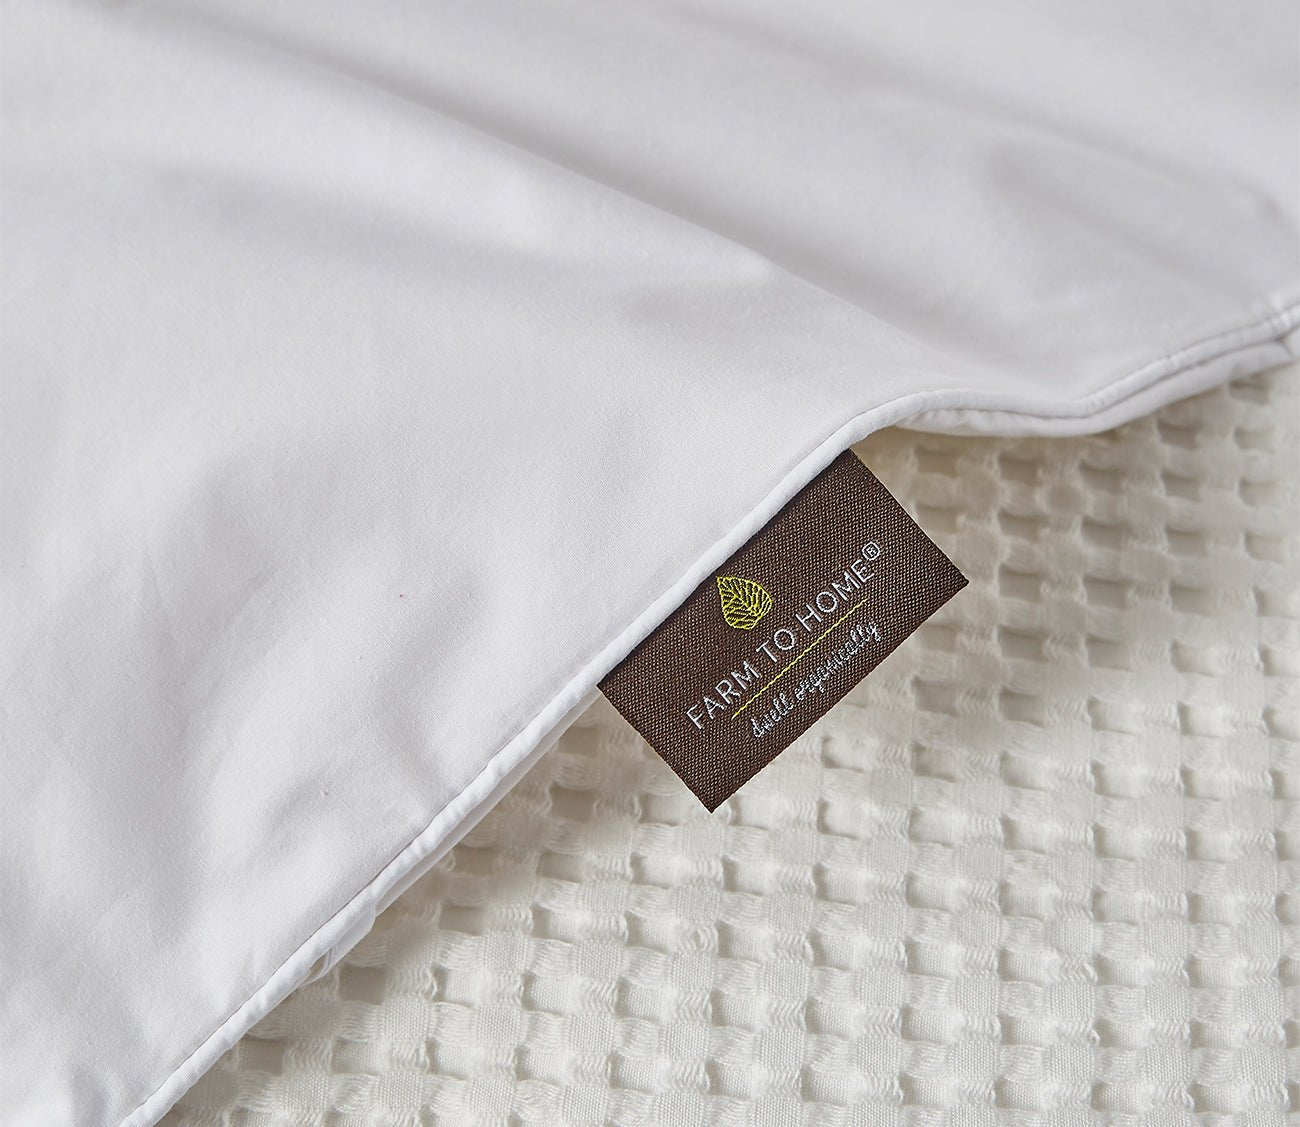 Organic Cotton White Down Comforter by Farm To Home